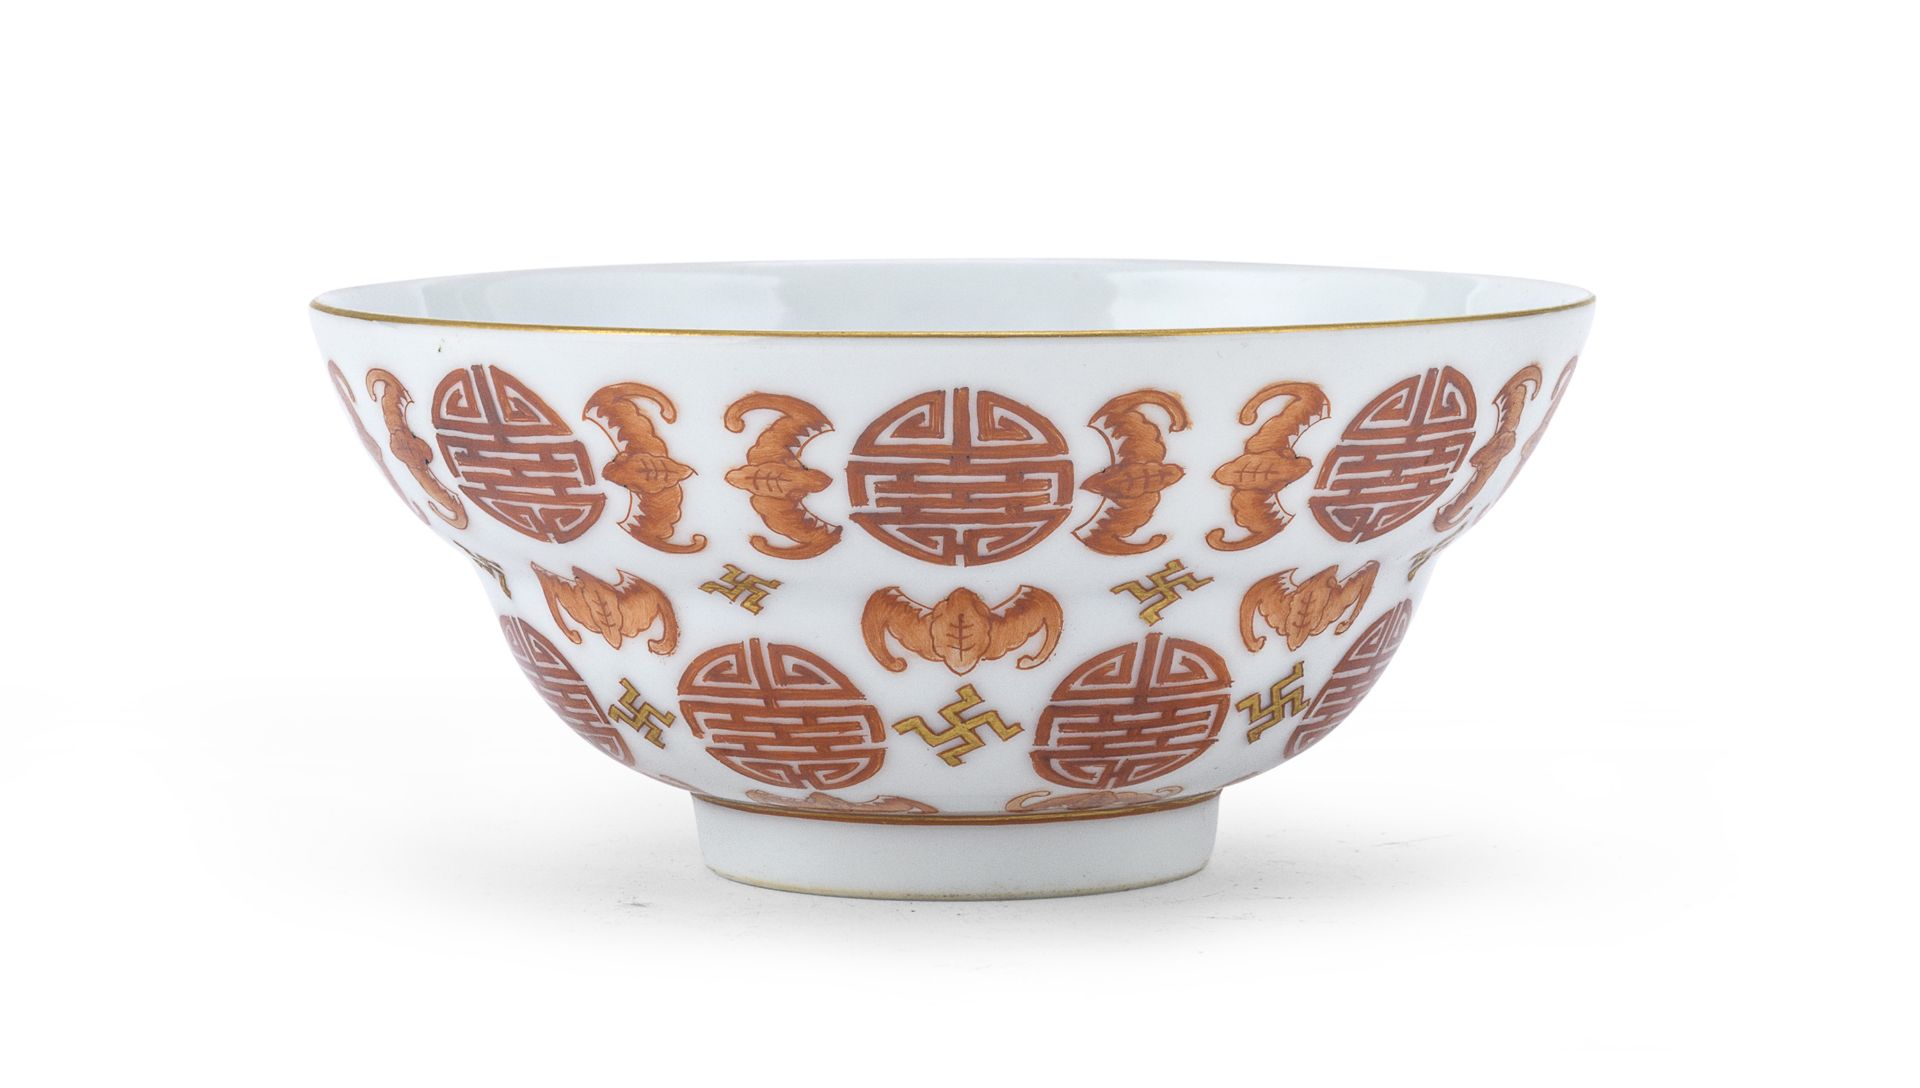 A CHINESE POLYCHROME AND GOLD ENAMELED PORCELAIN BOWL FIRST HALF 20TH CENTURY.